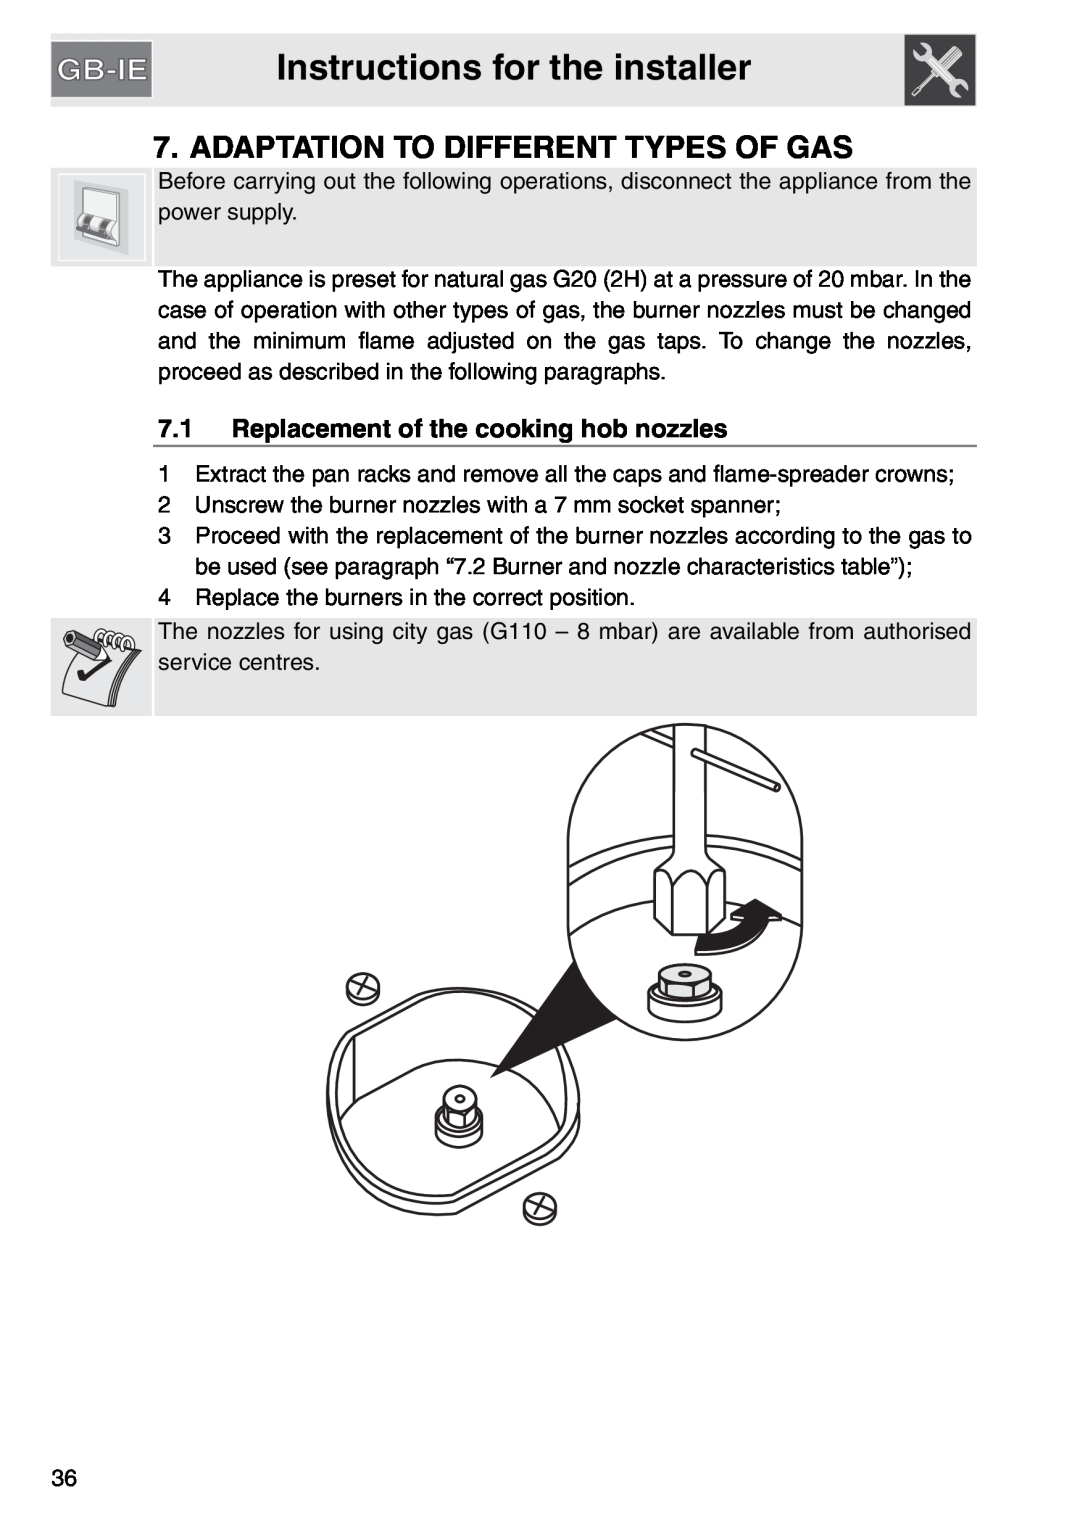 Smeg gas cooktop, PGA64 manual Adaptation To Different Types Of Gas, Instructions for the installer 